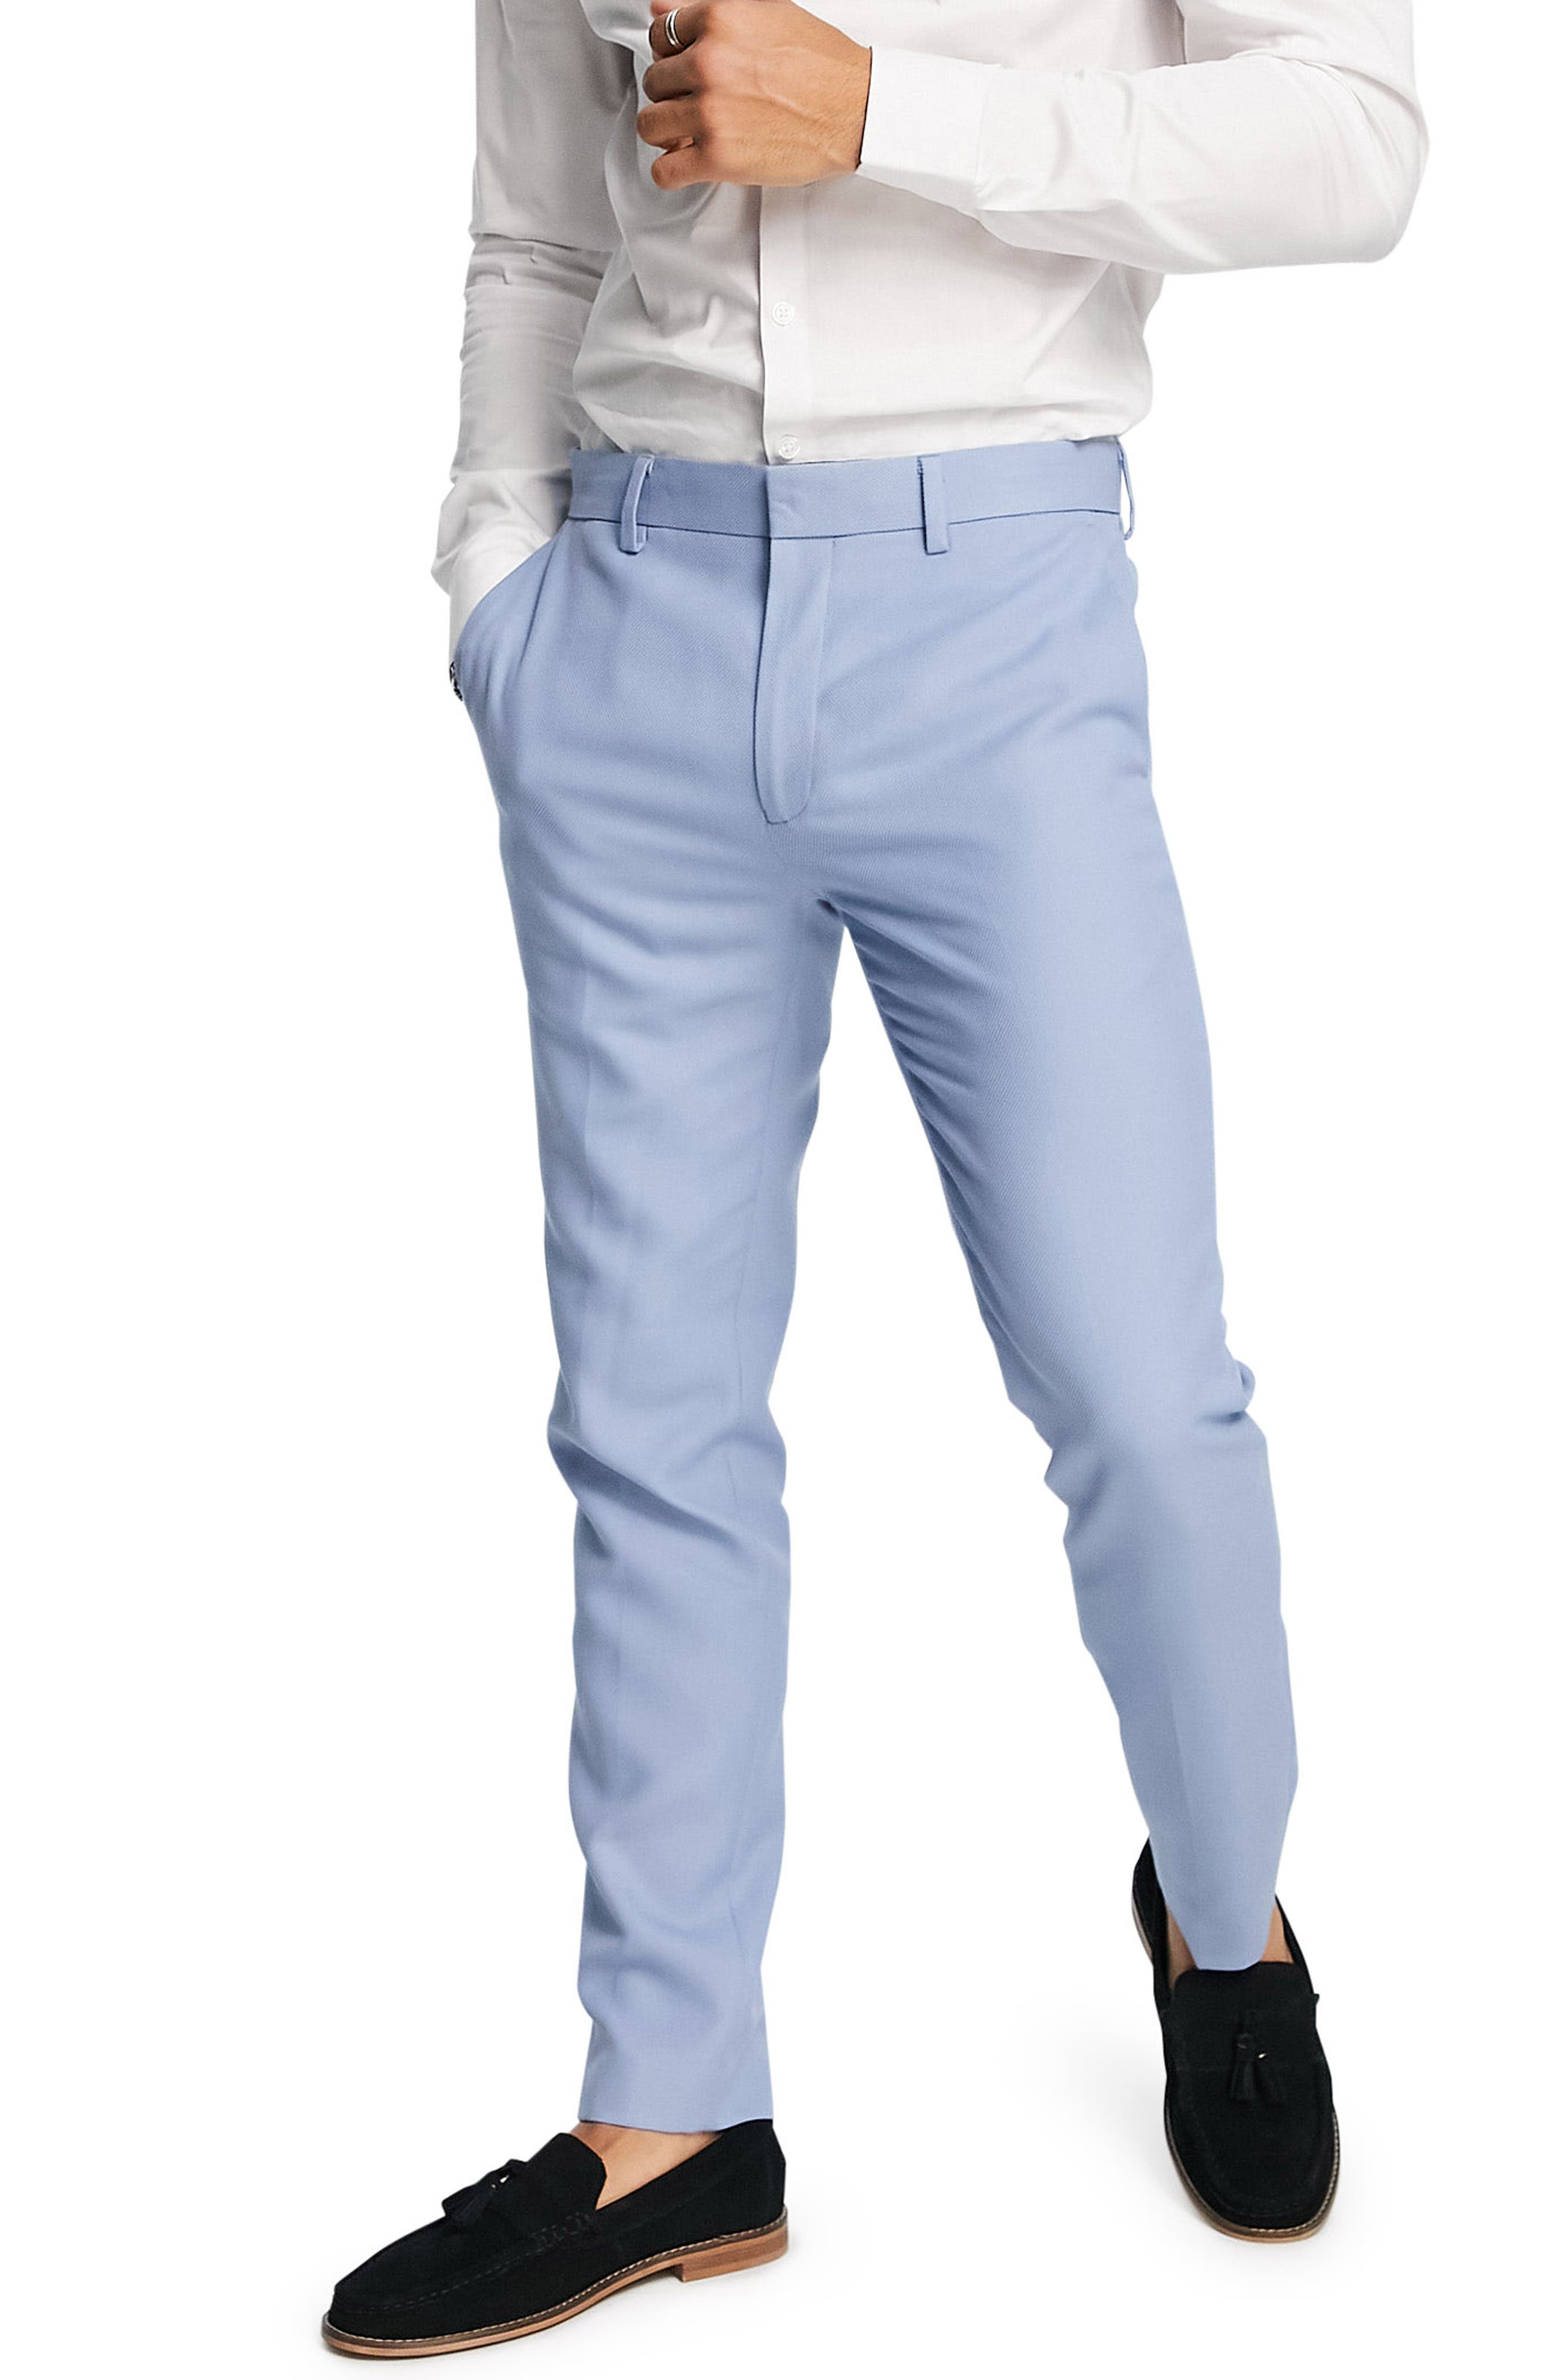 Emporio Armani Synthetic Trouser in Dark Blue Mens Clothing Trousers Blue Slacks and Chinos Casual trousers and trousers for Men 